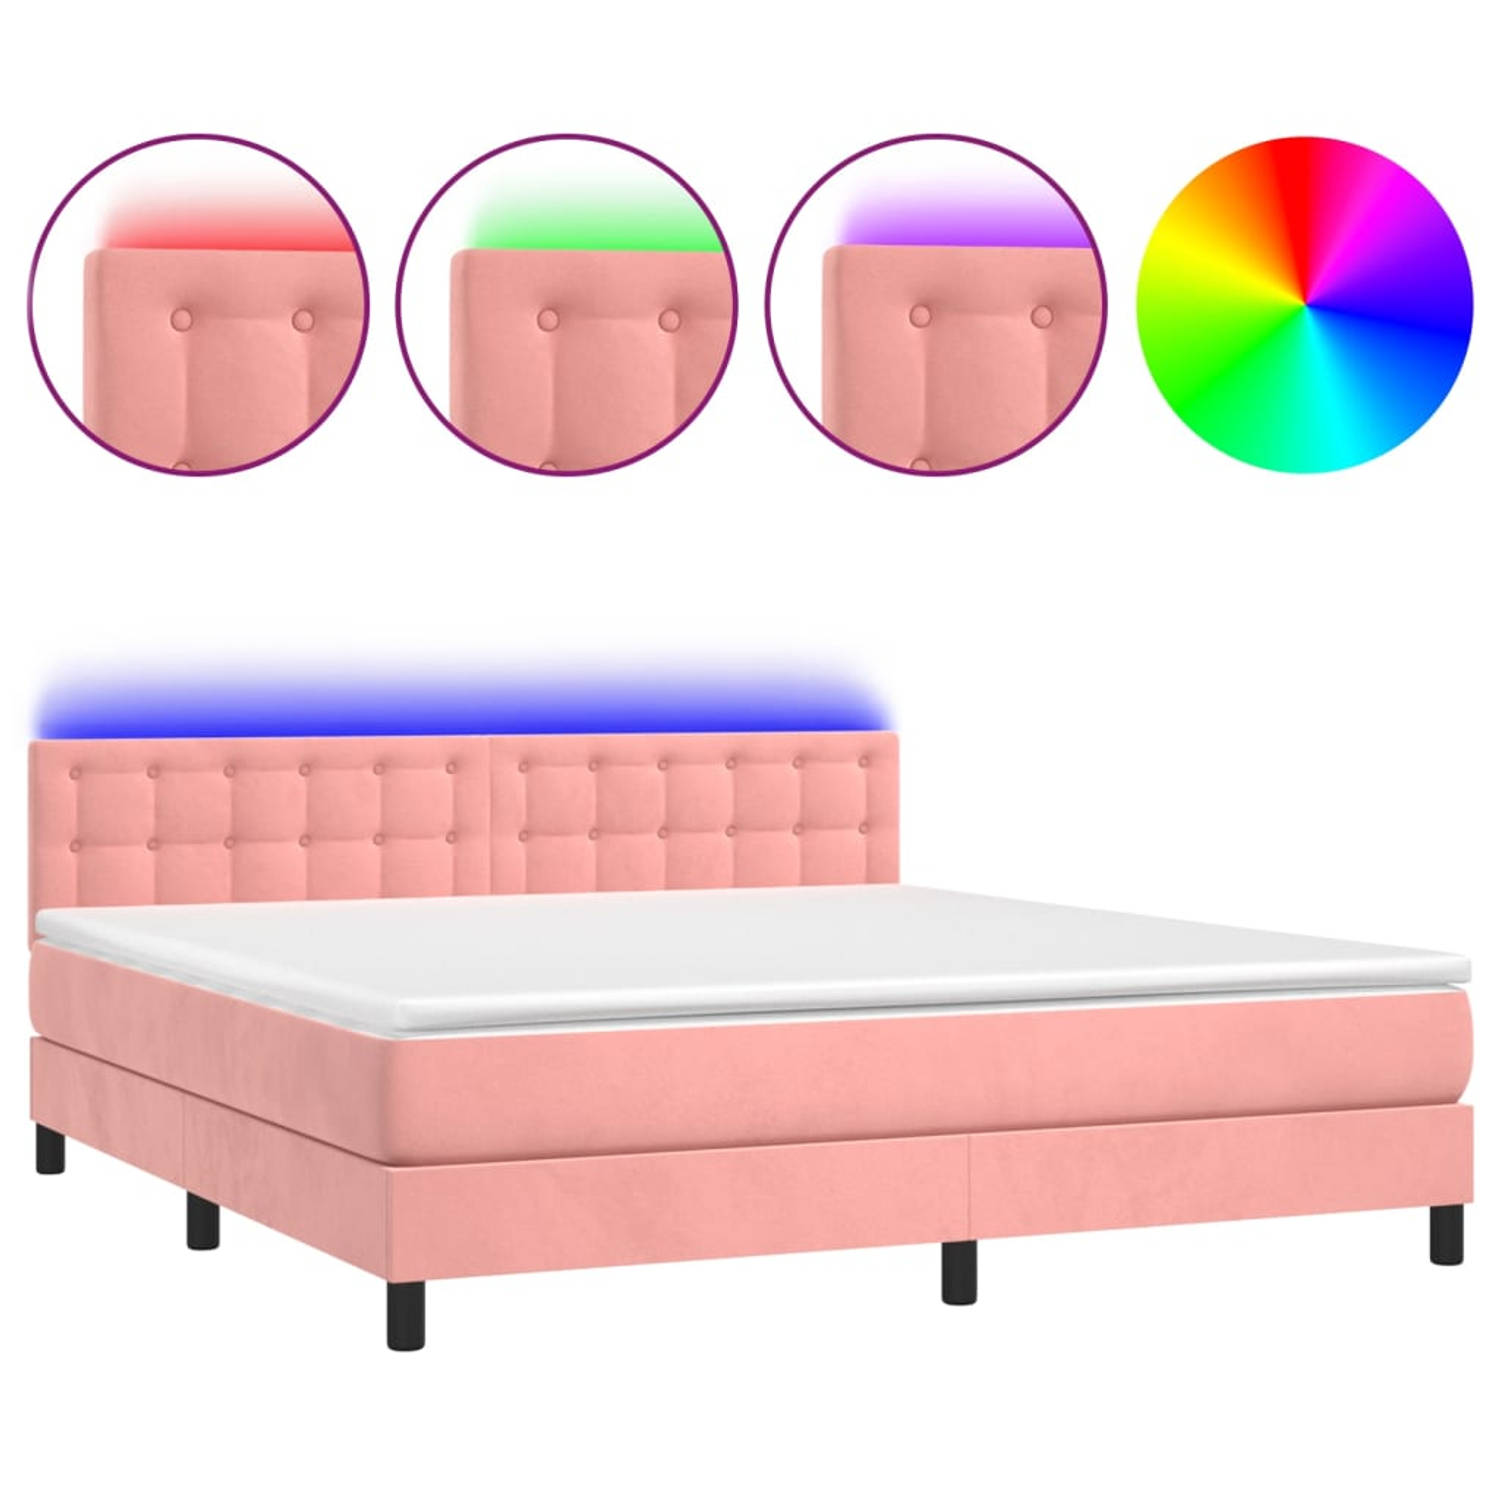 The Living Store Bed Luxe Roze Fluweel 180x200 - LED - Pocketvering